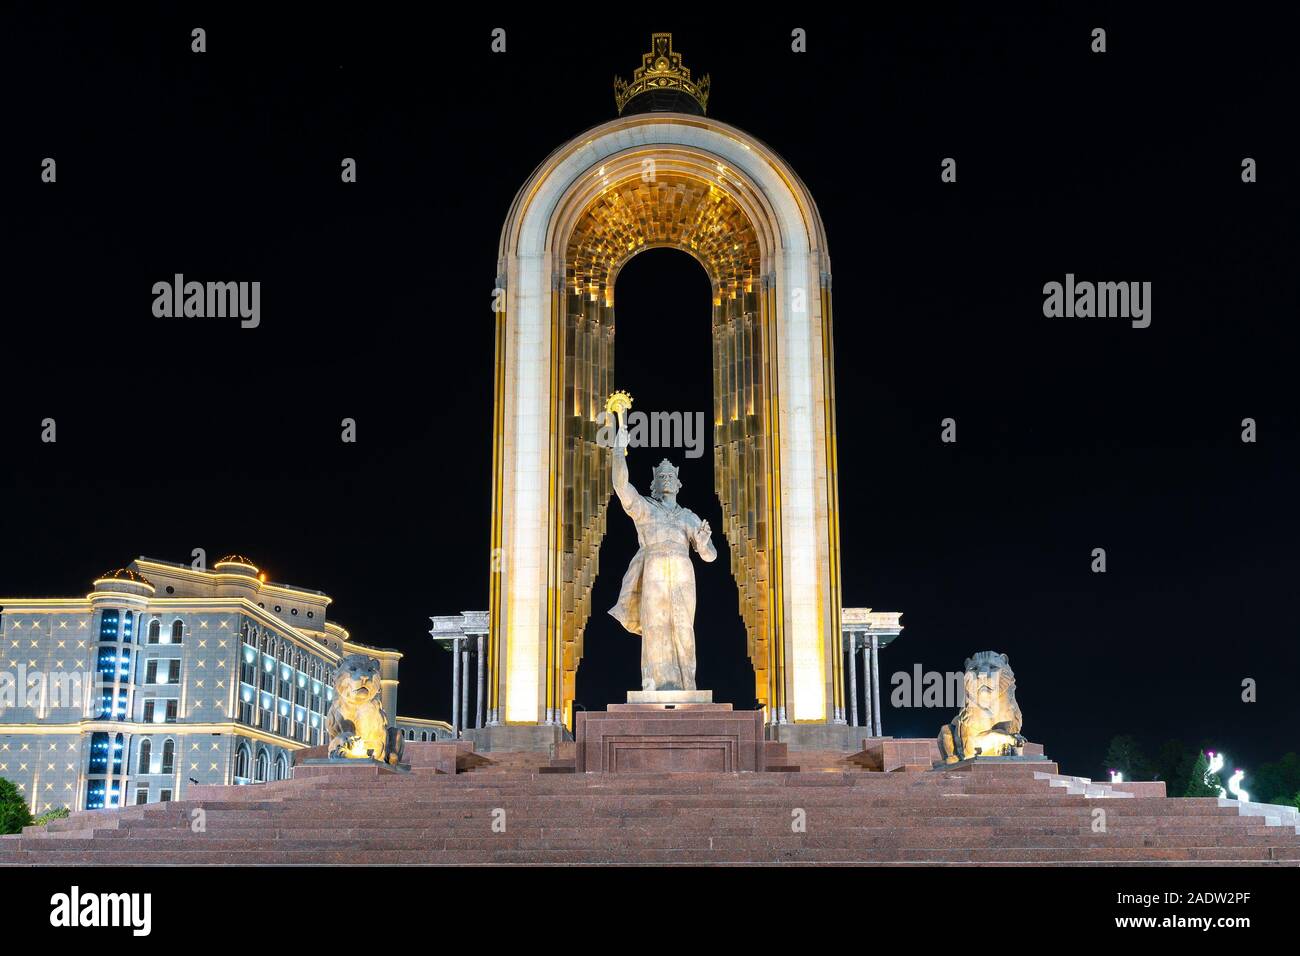 Dushanbe Ismoil Somoni Holding with his Right Hand a Scepter Statue Picturesque View at Dark Night Time Stock Photo